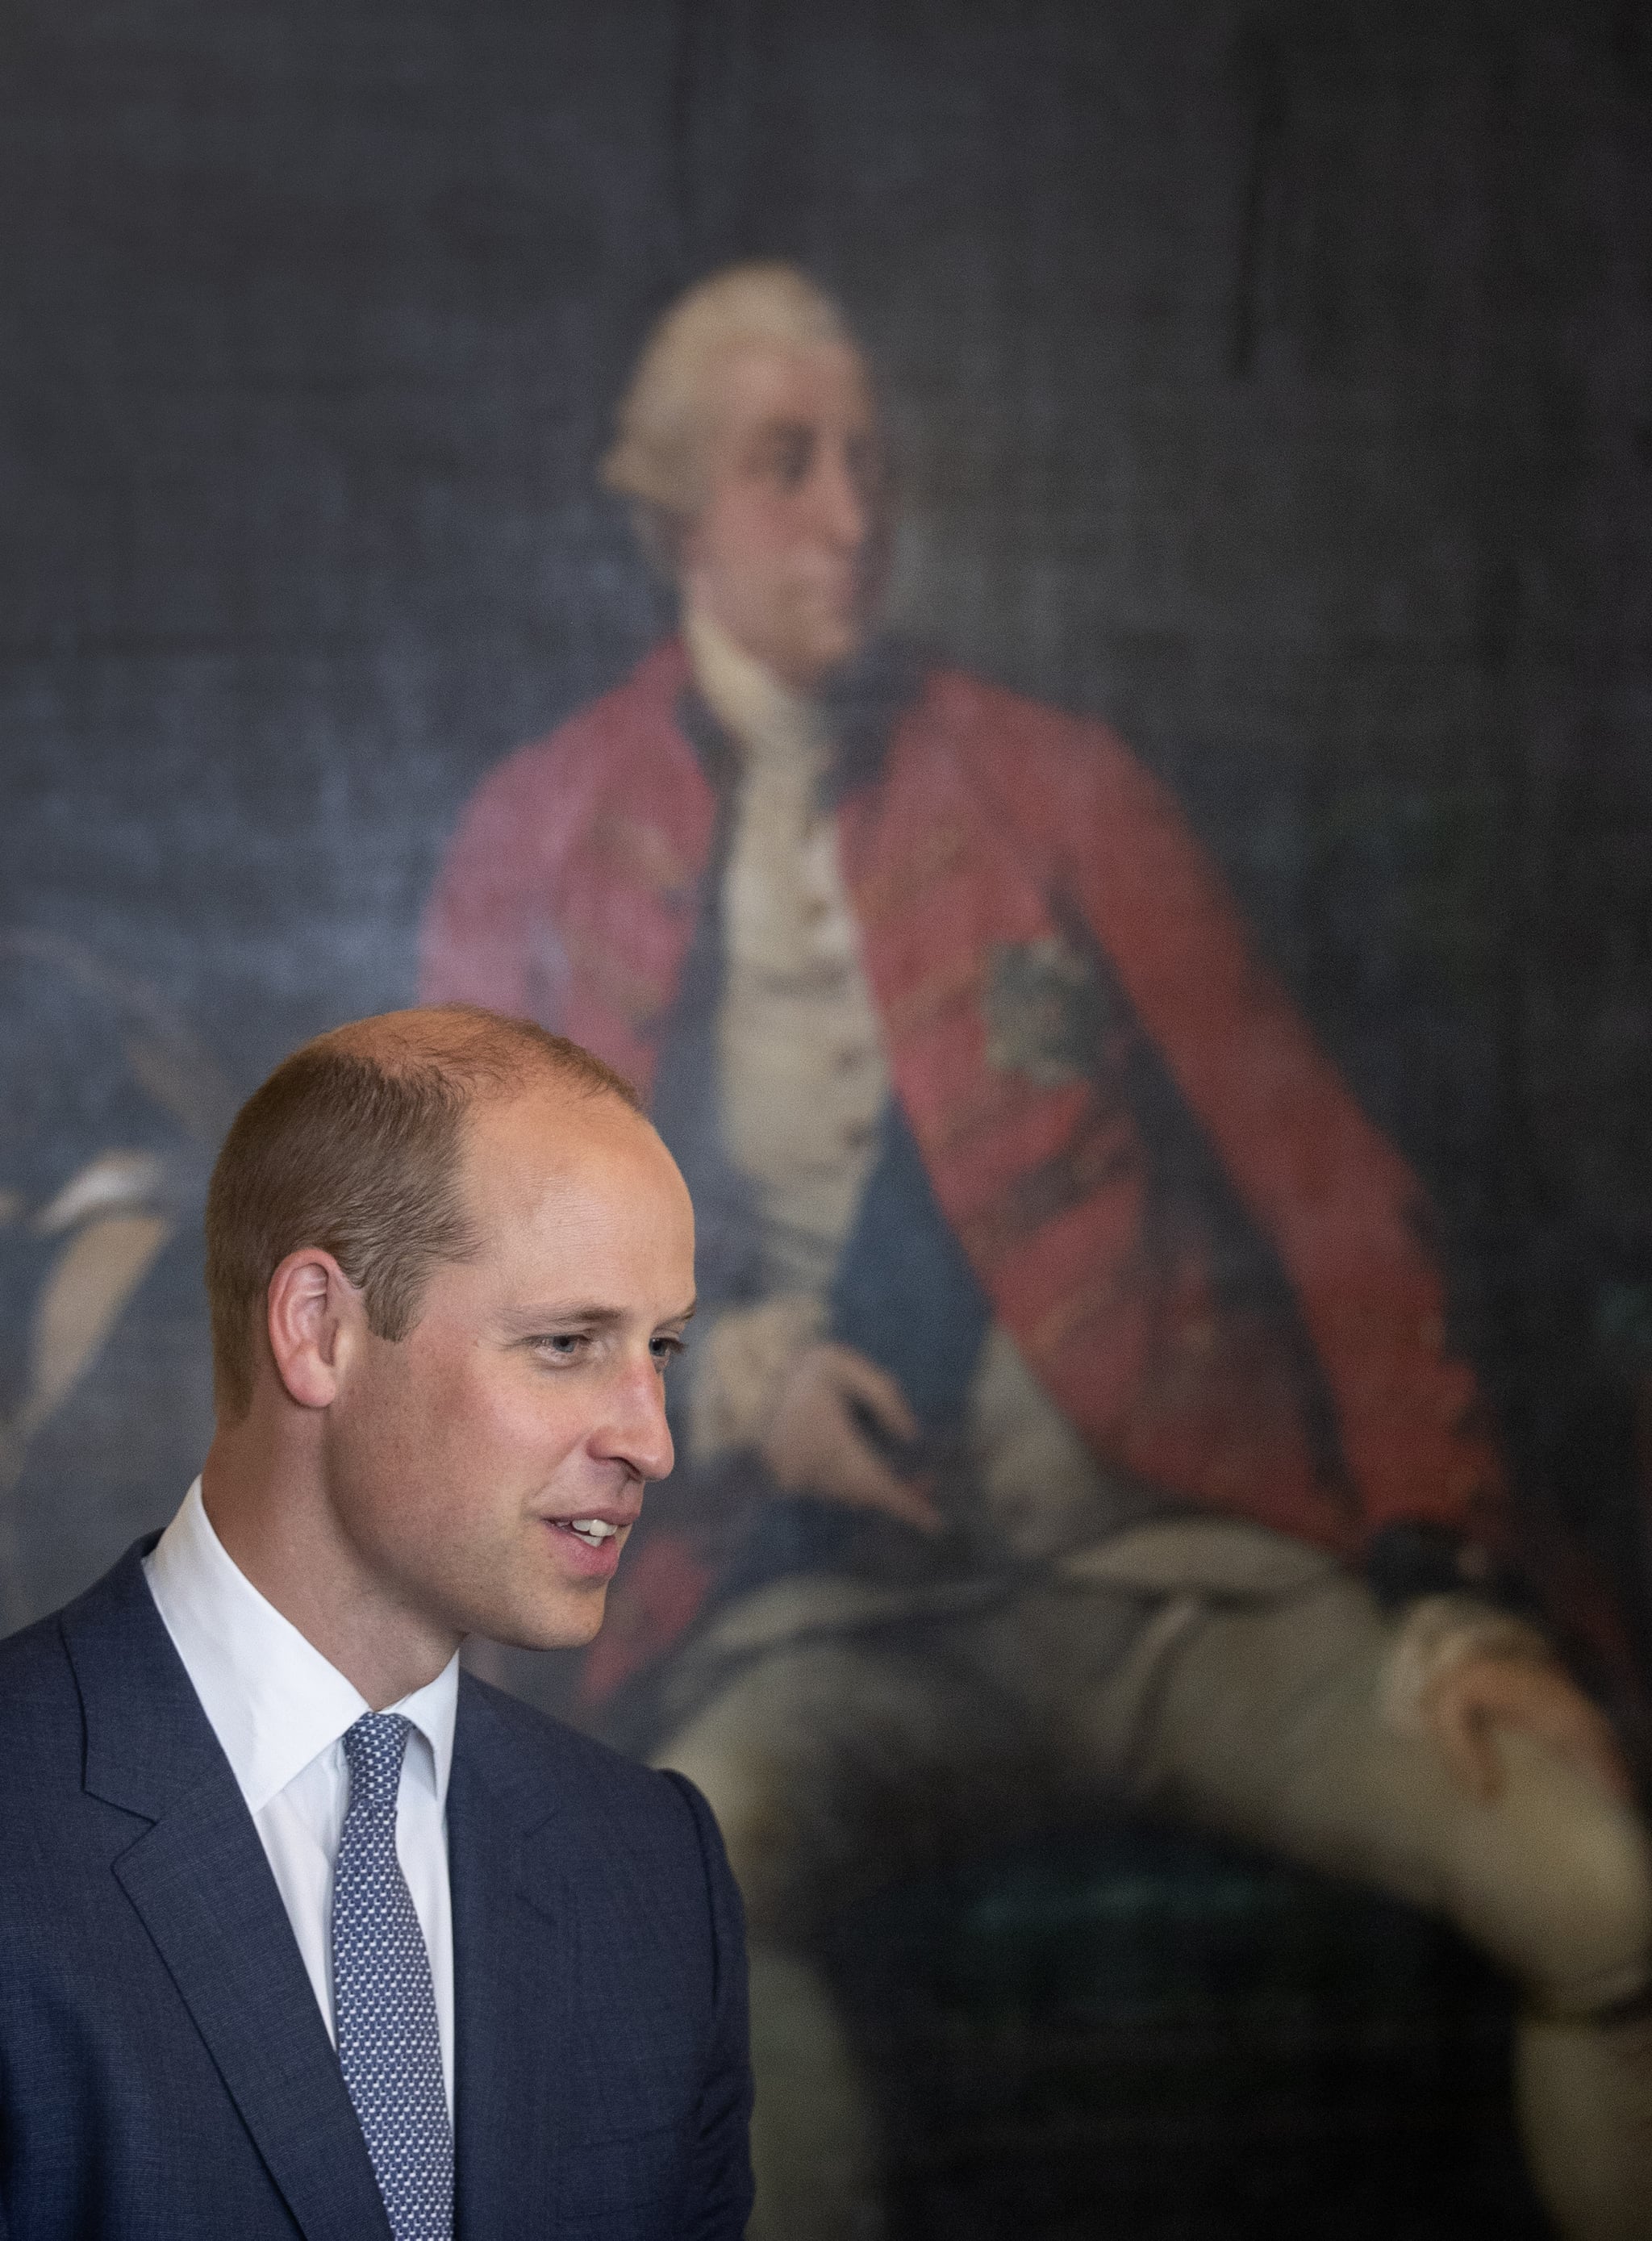 EDINBURGH, SCOTLAND - JULY 05:  Prince William, Duke Of Cambridge stands in front of a portrait of George III during a visit to the Royal Society of Edinburgh on July 05, 2018 in Edinburgh, Scotland. (Photo by Jane Barlow - WPA Pool/Getty Images)